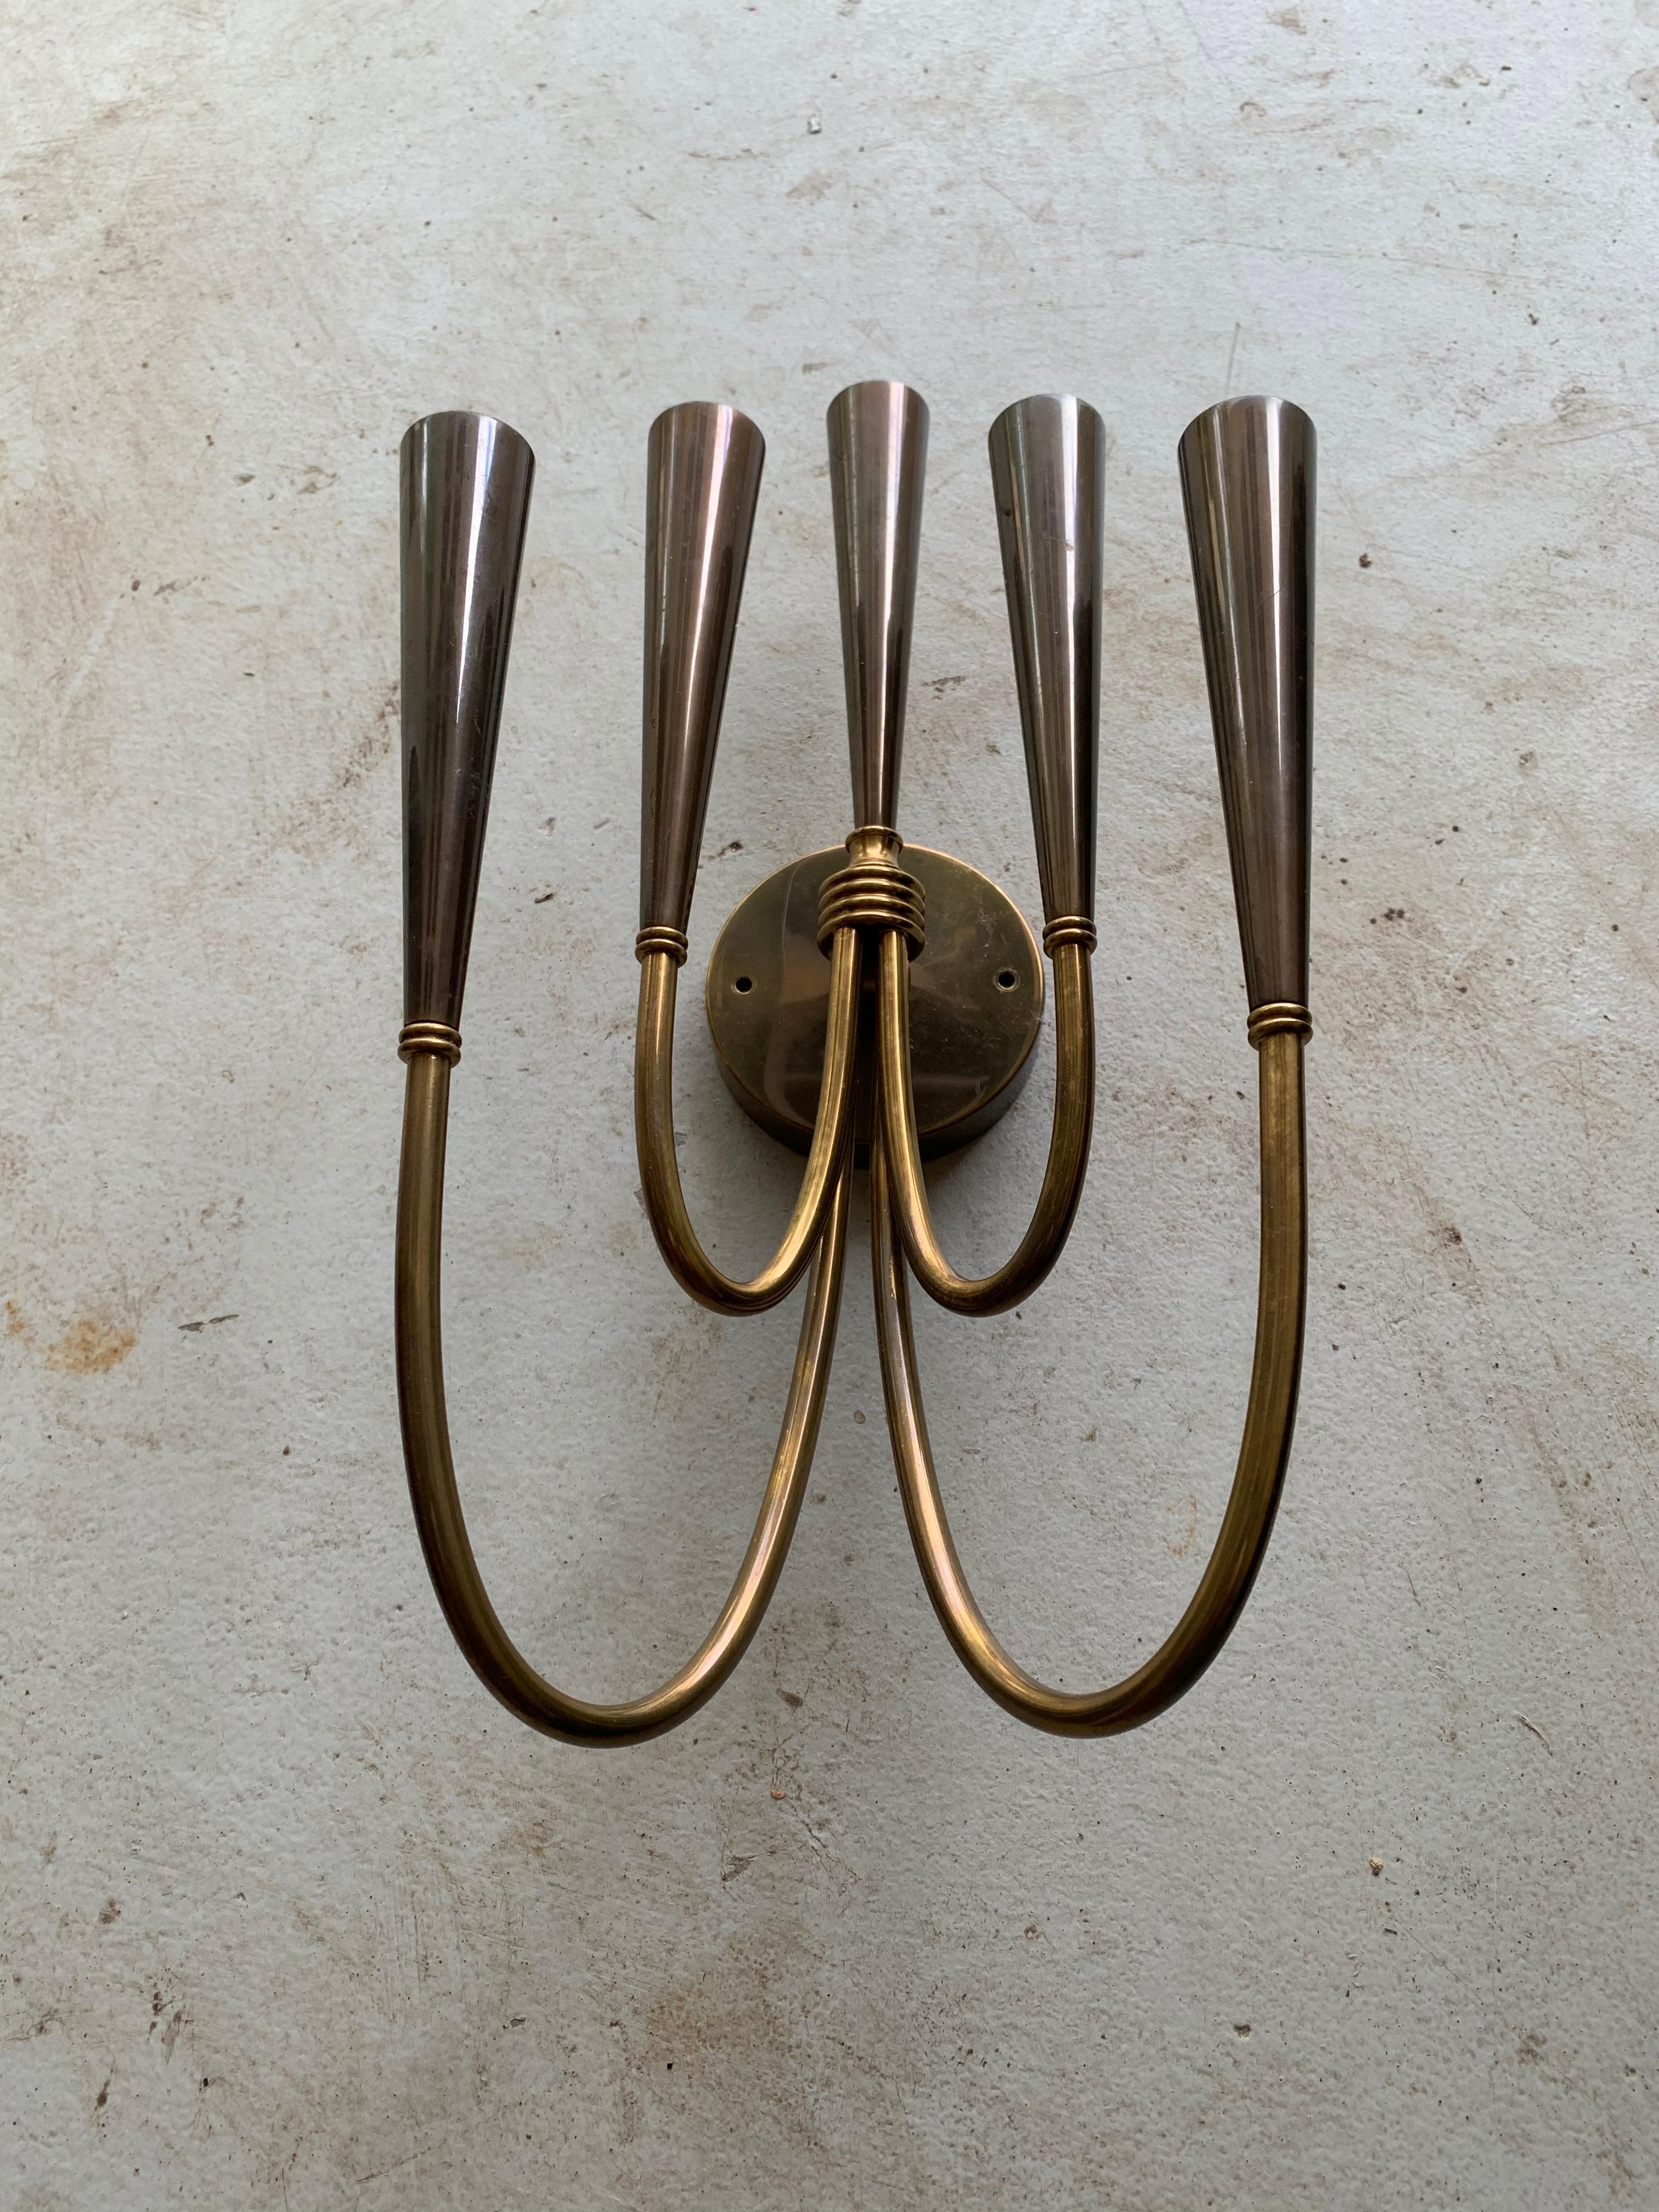 A pair of period midcentury sconces in Brass accented in gray metallic, each with five arms.

In the style of Stilnovo.

Dimensions: 14 height x 8 width x 6.5 deep x 3.5 backplate.